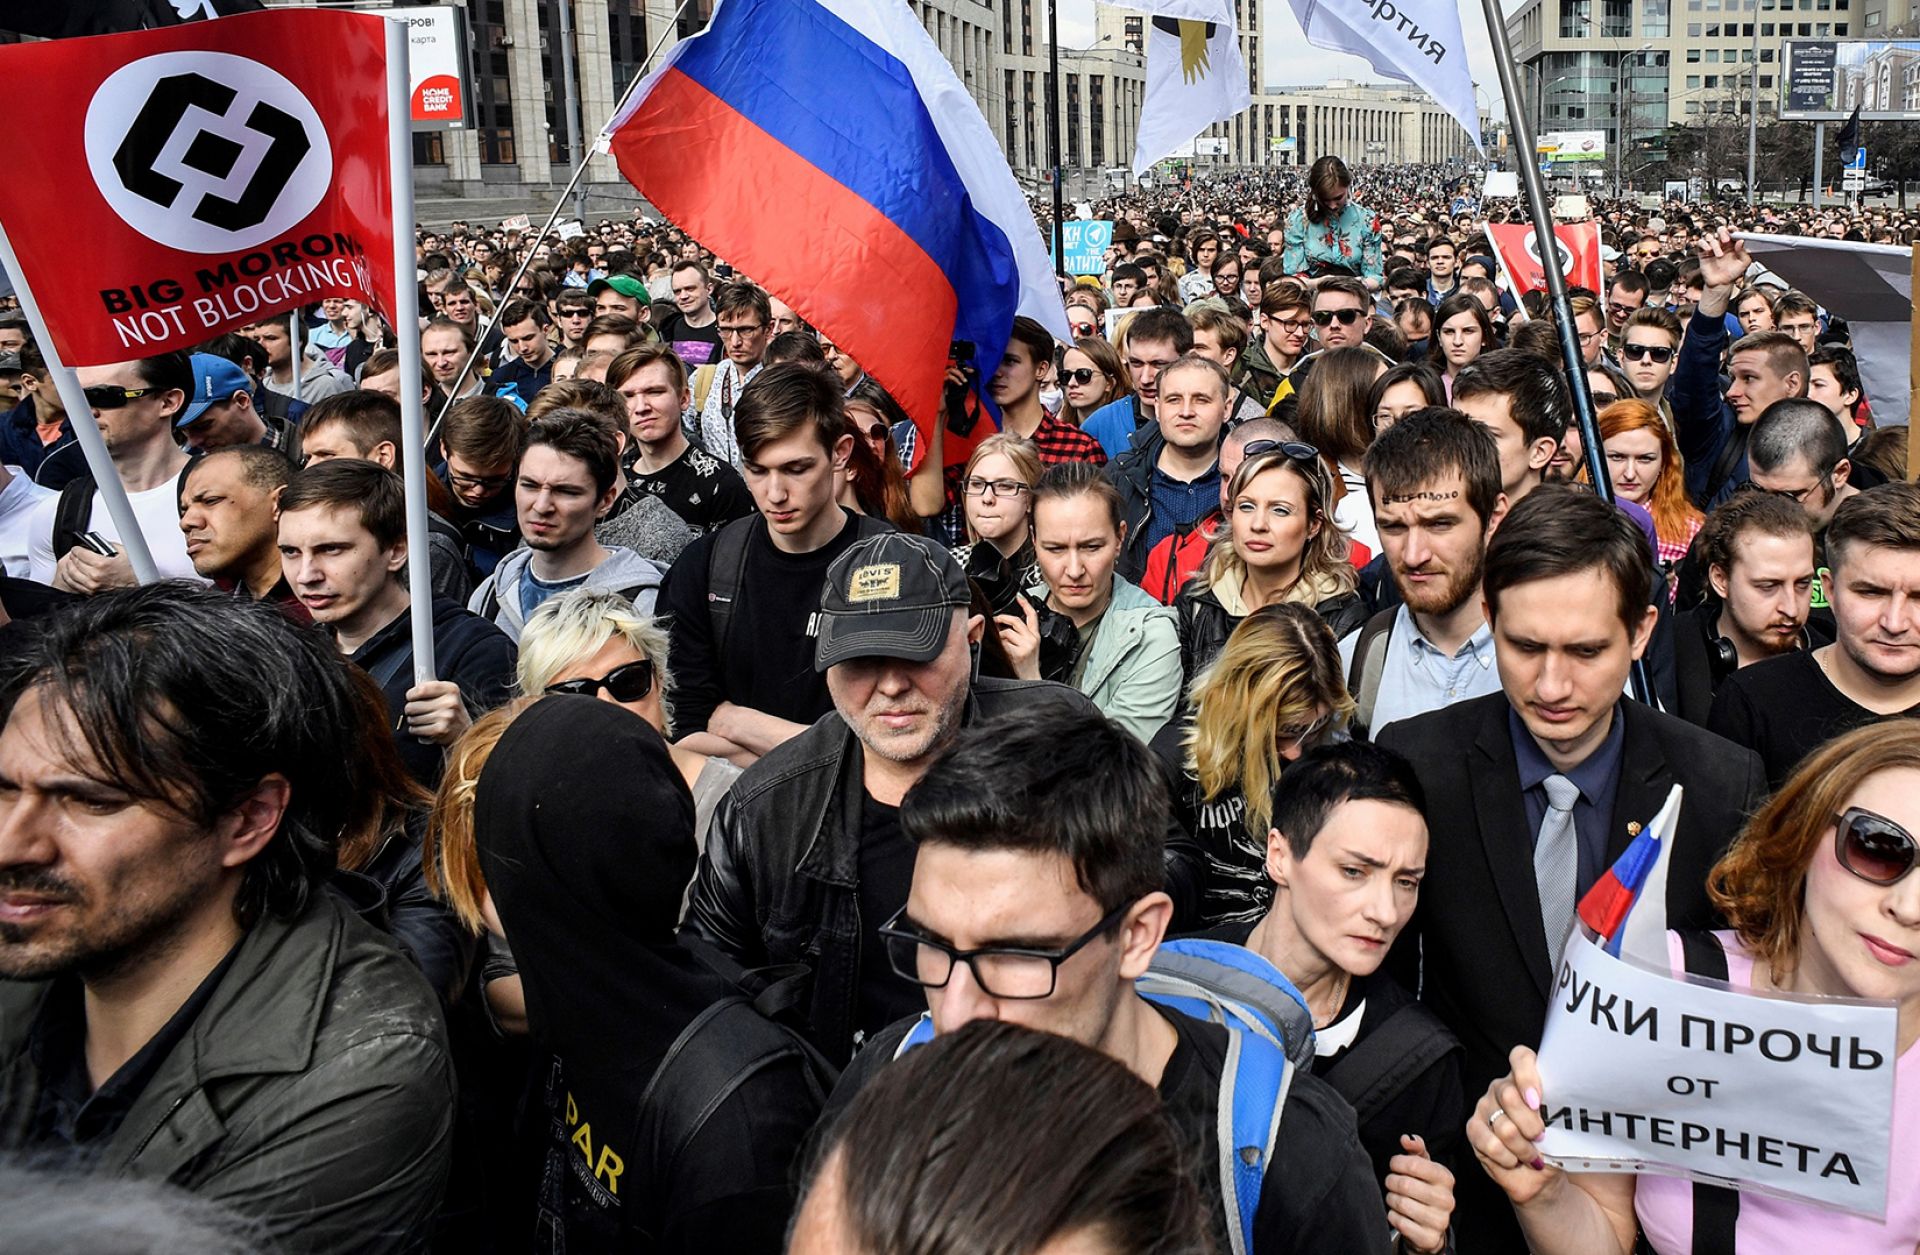 Russian citizens gather on the streets of Moscow to demand greater internet freedom in the country.